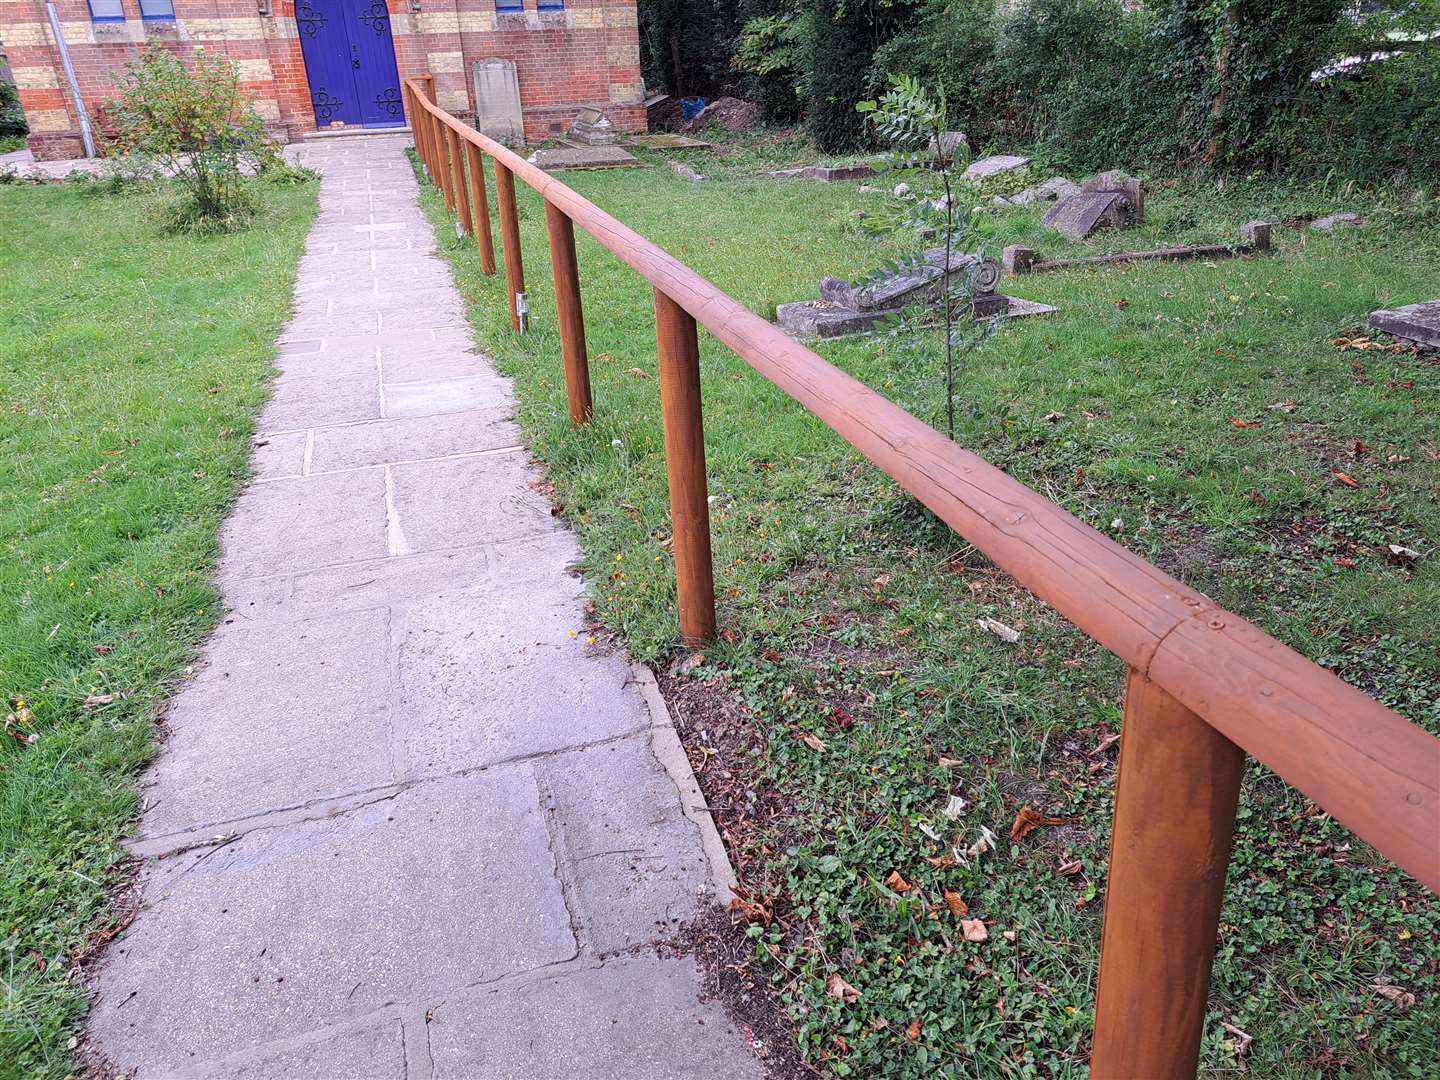 A new handrail guides visitors to the building